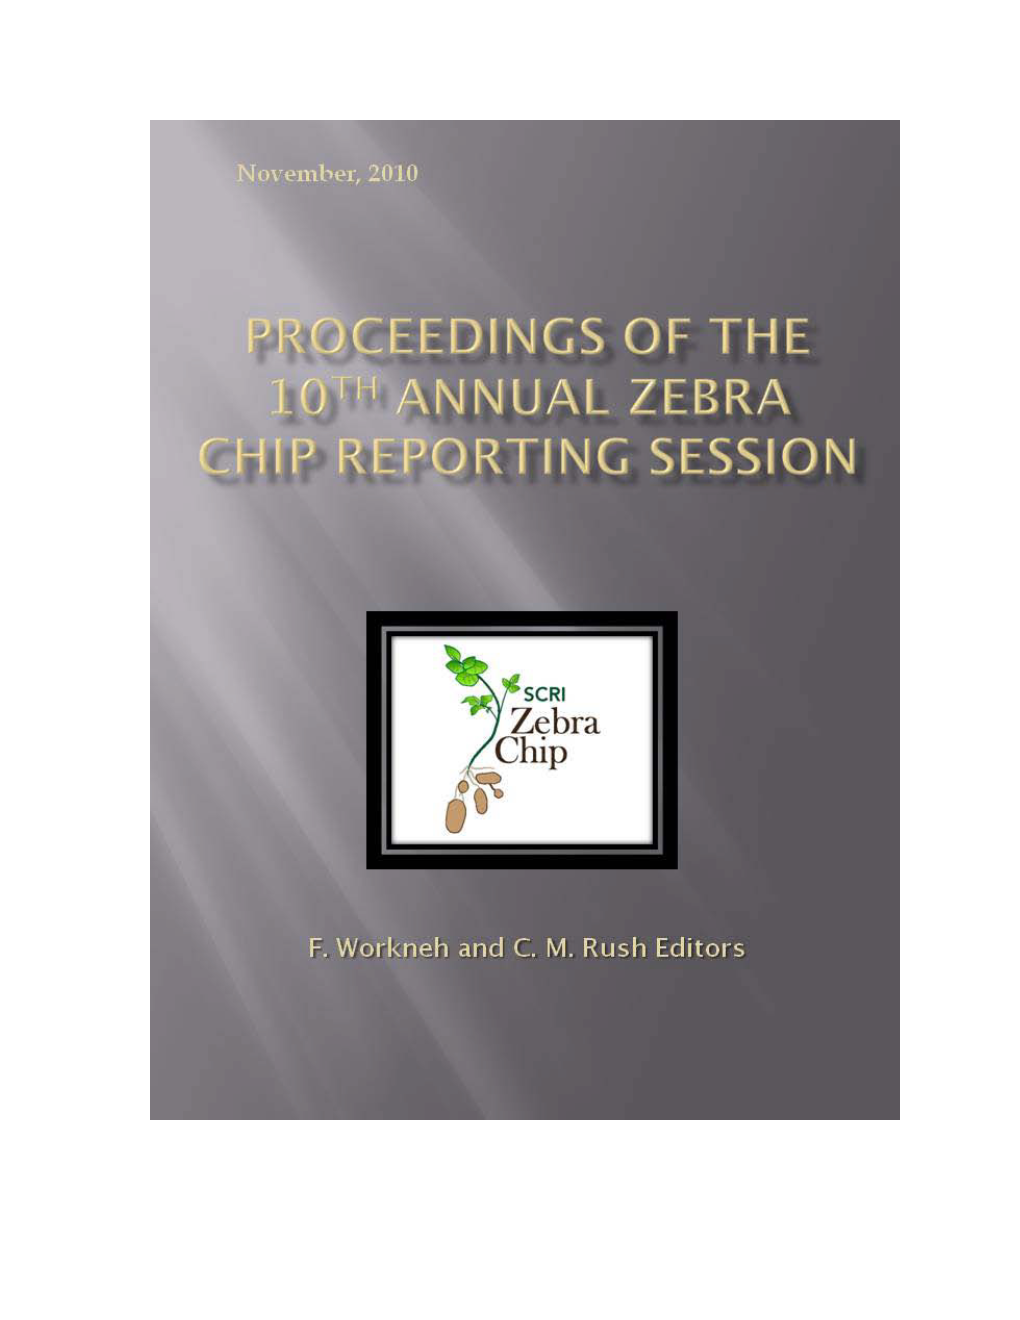 PROCEEDINGS of the 10Th ANNUAL 2010 ZEBRA CHIP REPORTING SESSION